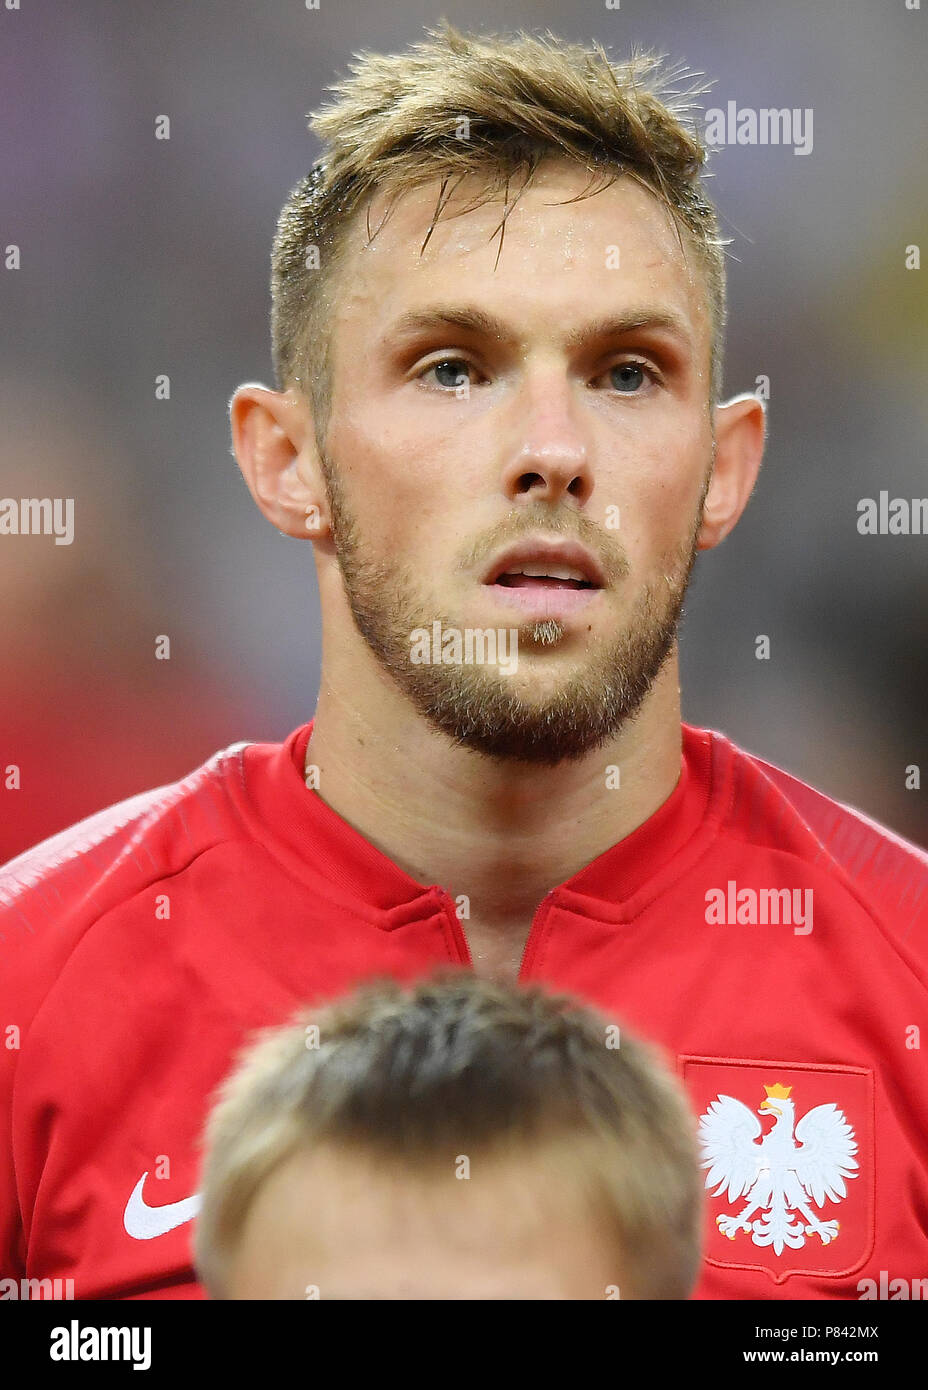 KAZAN, RUSSIA - JUNE 24: Maciej Rybus of Poland during the 2018 FIFA World Cup Russia group H match between Poland and Colombia at Kazan Arena on June 24, 2018 in Kazan, Russia. (Photo by Lukasz Laskowski/PressFocus/MB Media) Stock Photo